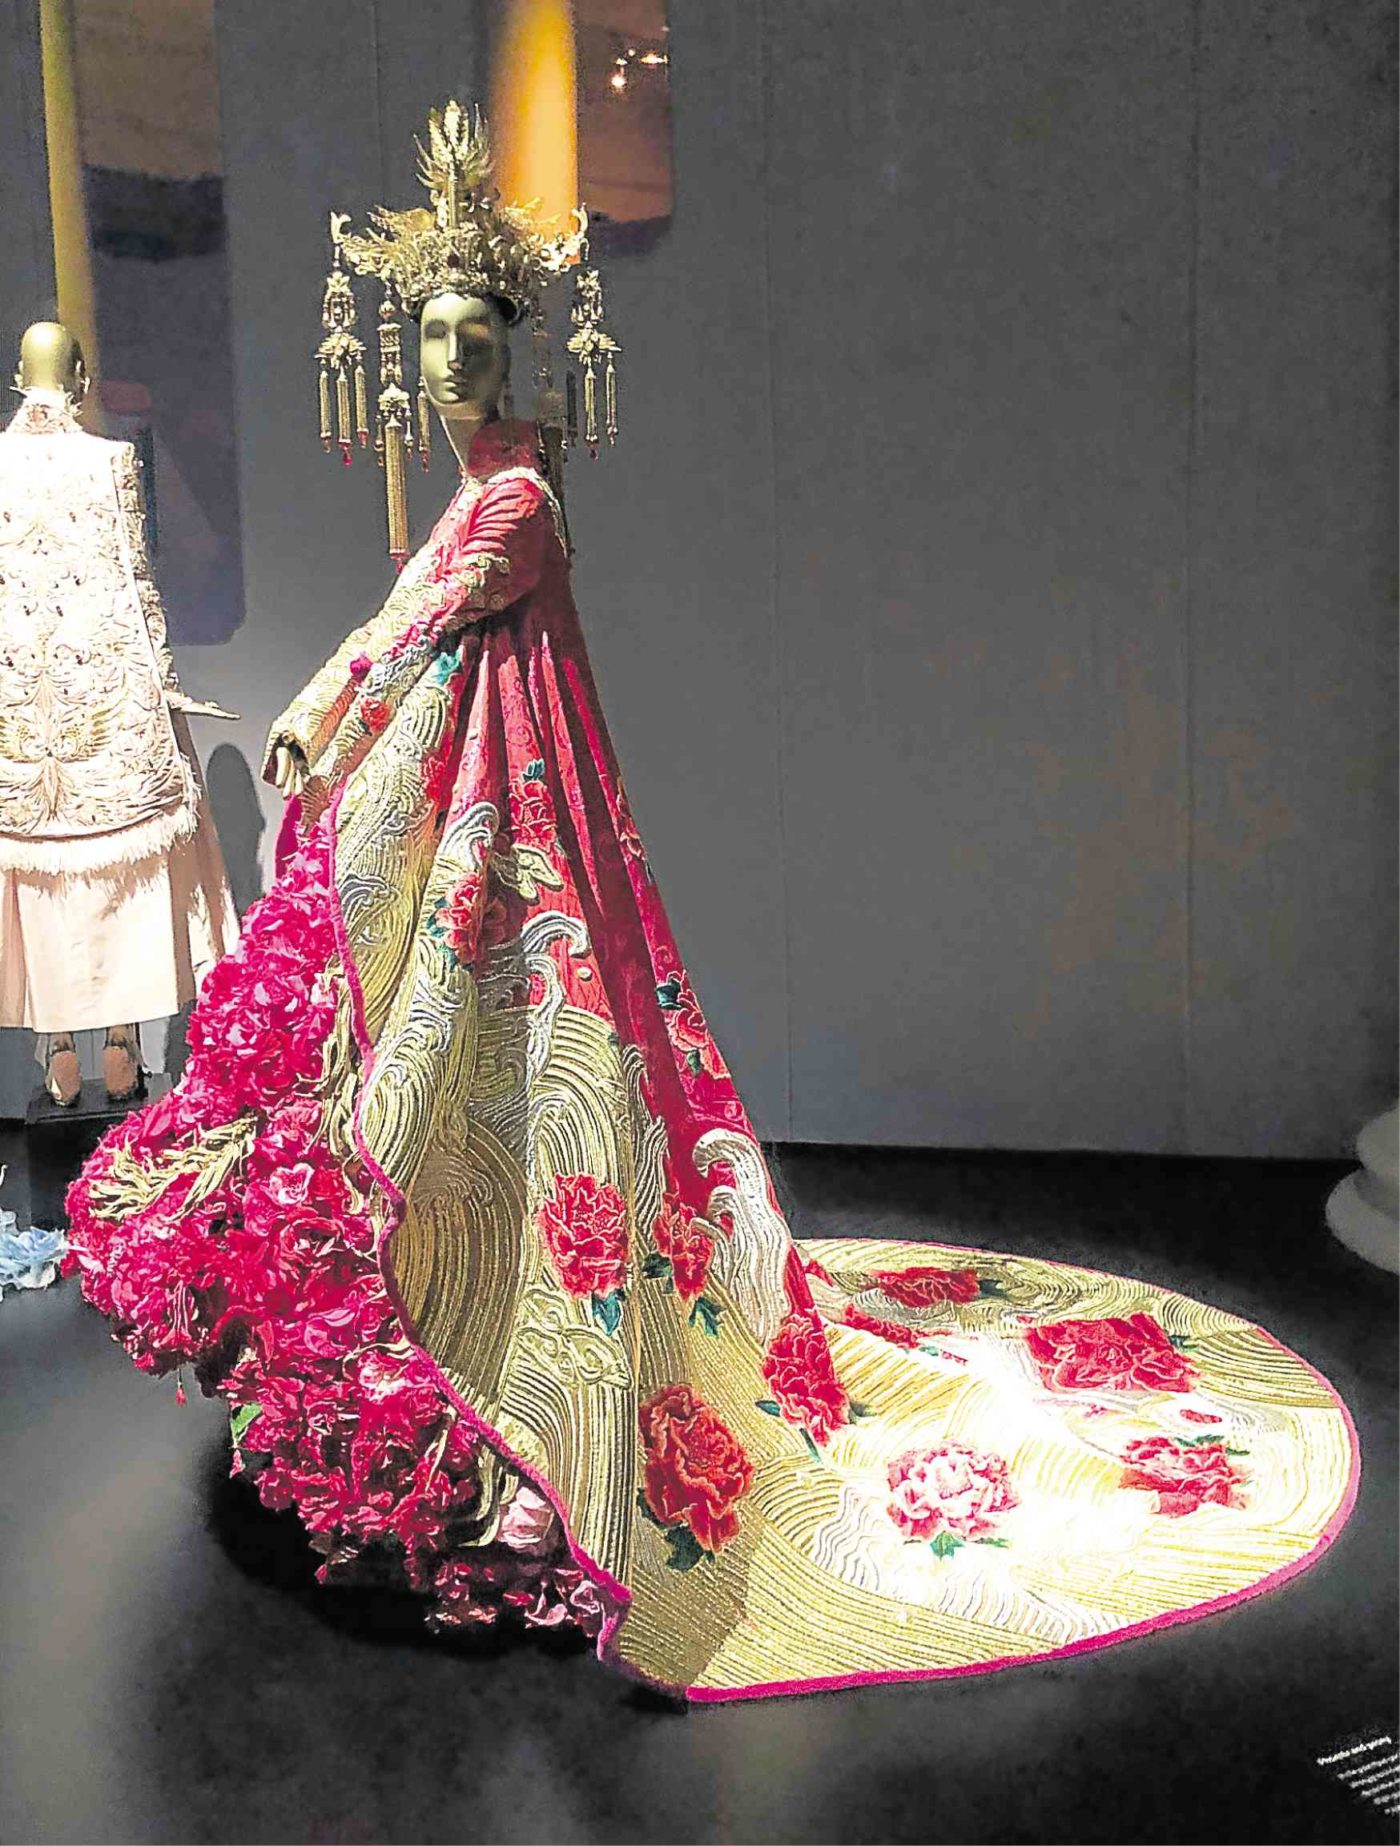 Guo Pei’s monumental fashion—A fusion of couture and culture ...